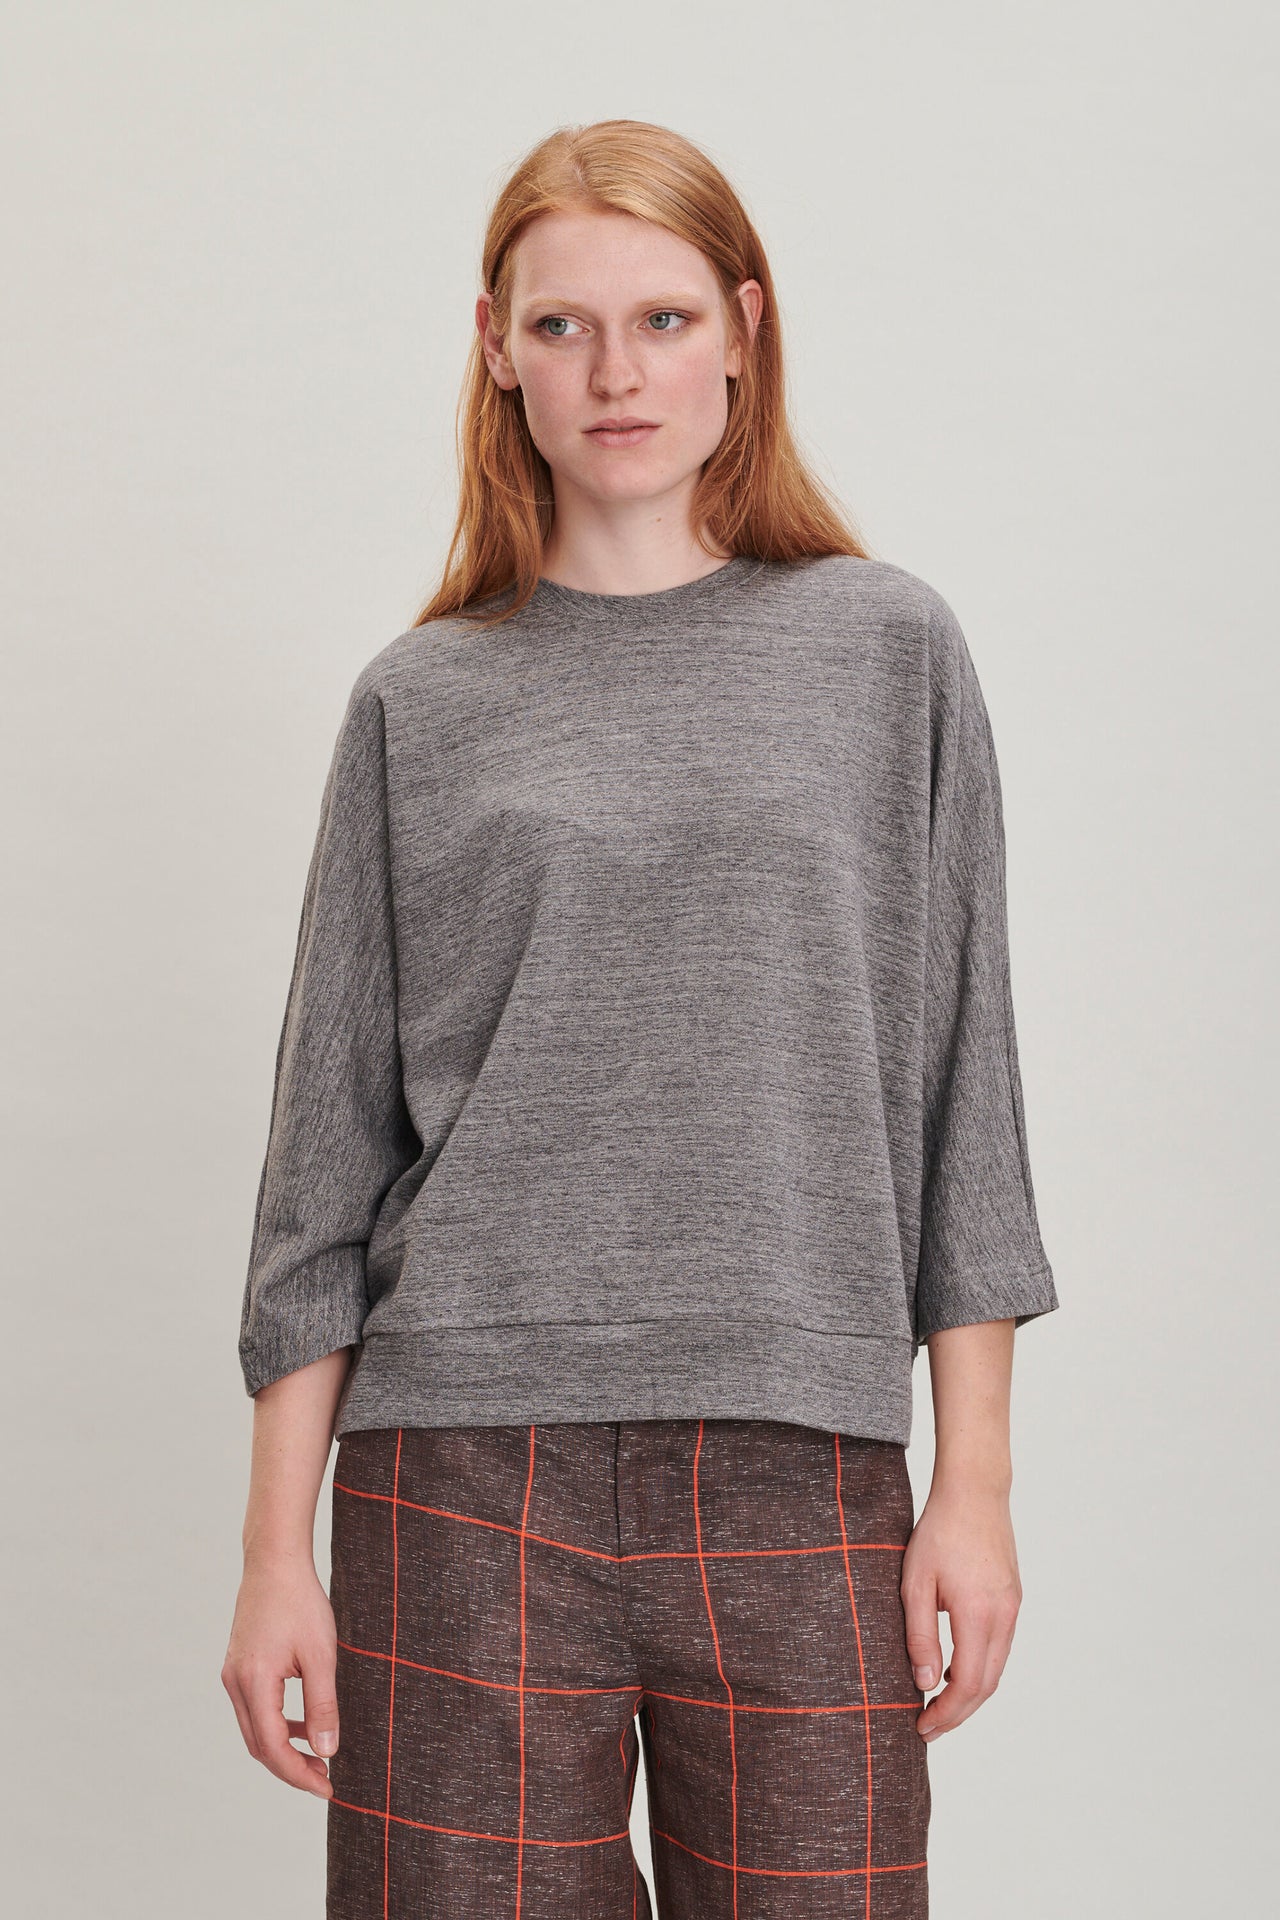 Long Sleeve Top in a Grey Very Fine Japanese Cotton Jersey